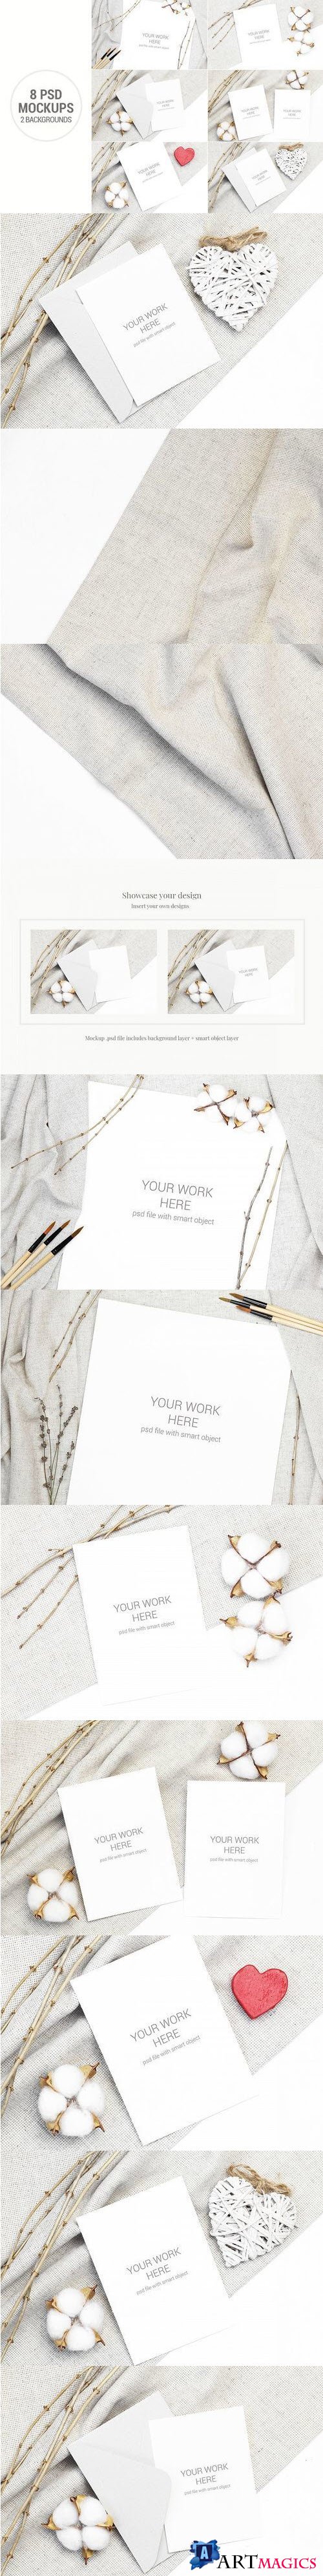 Invitation Card Mockup set with cotton and branches - 416644